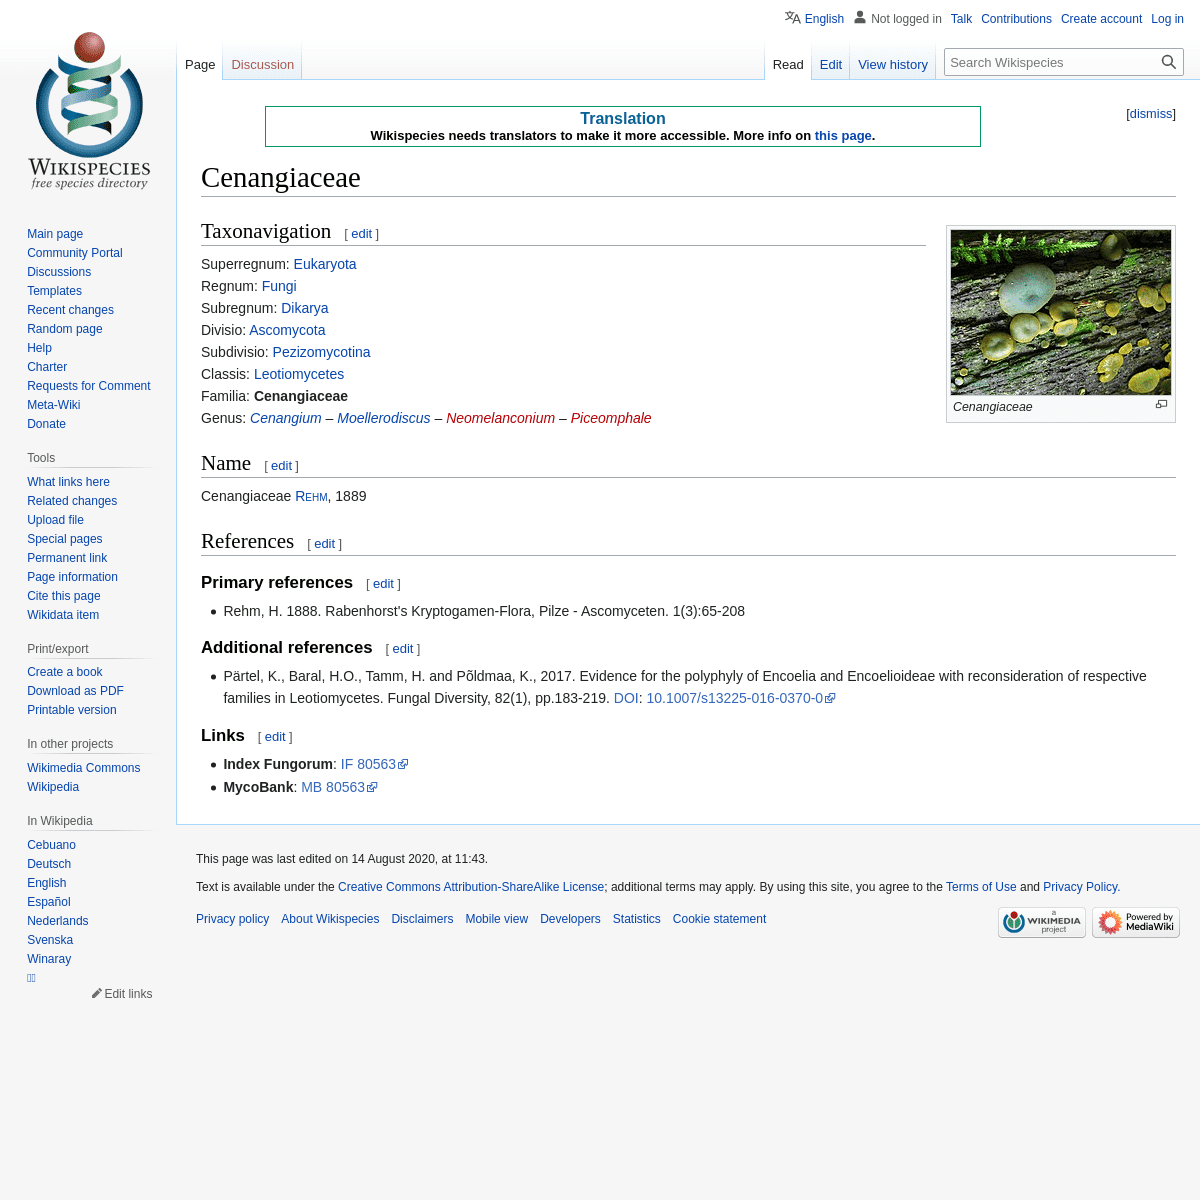 A complete backup of https://species.wikimedia.org/wiki/Cenangiaceae